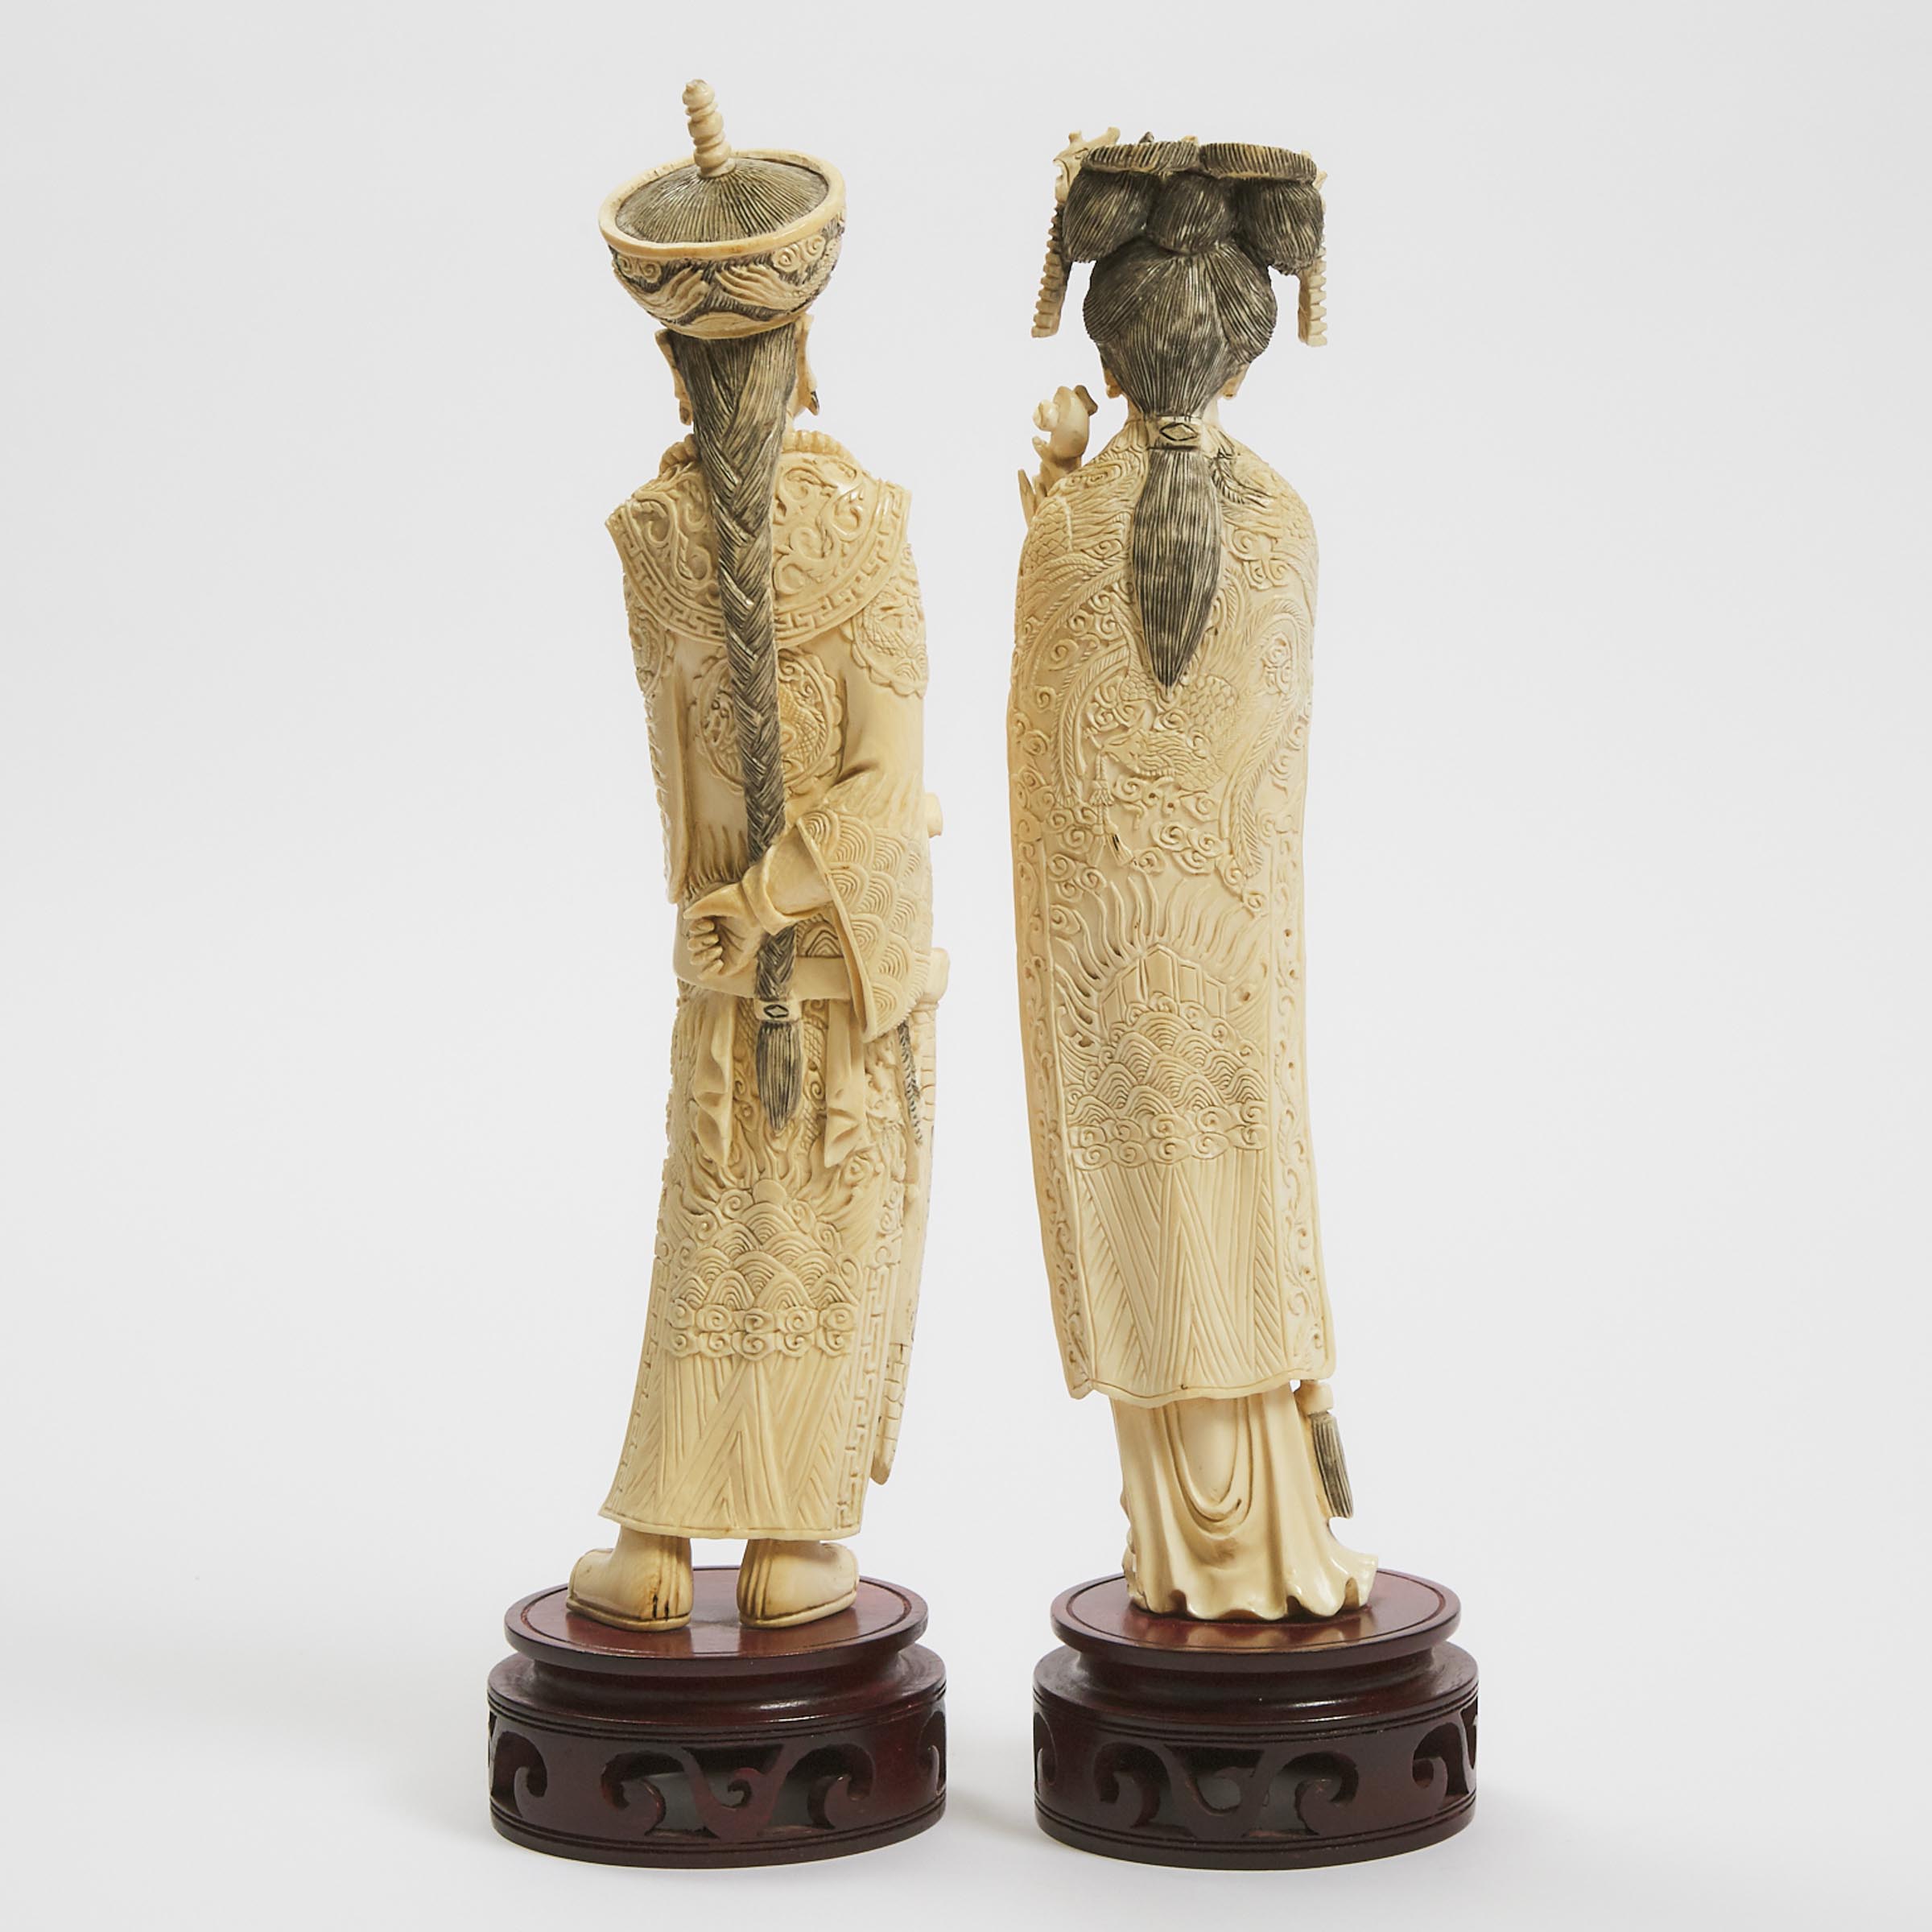 A Pair of Ivory Emperor and Empress Figures, Mid 20th Century